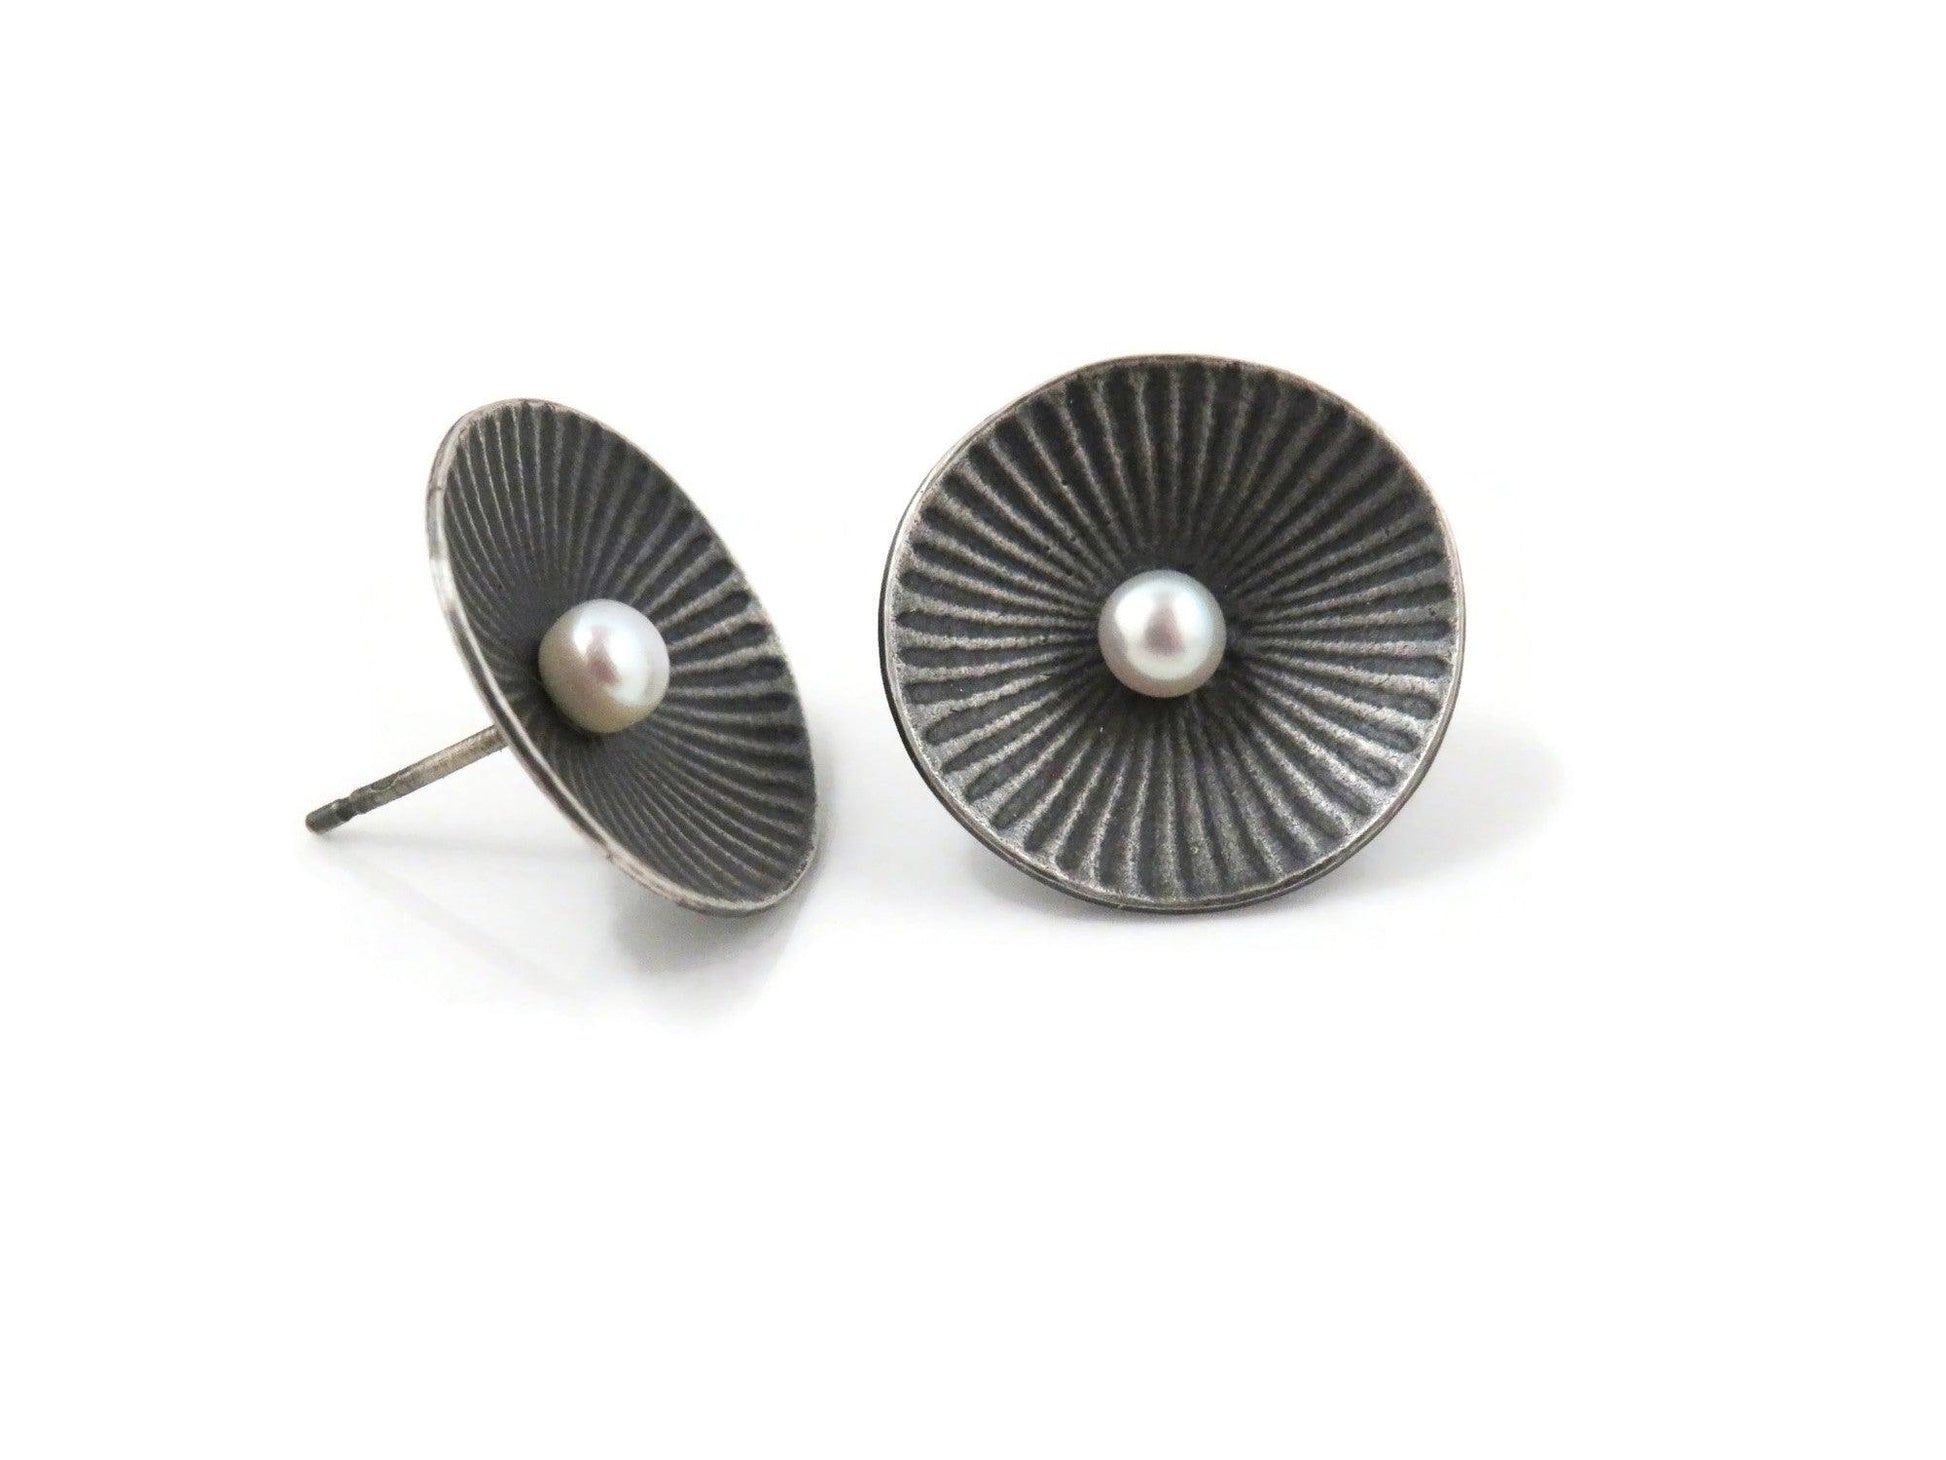 Pearl Silver Earrings with Embossed Design